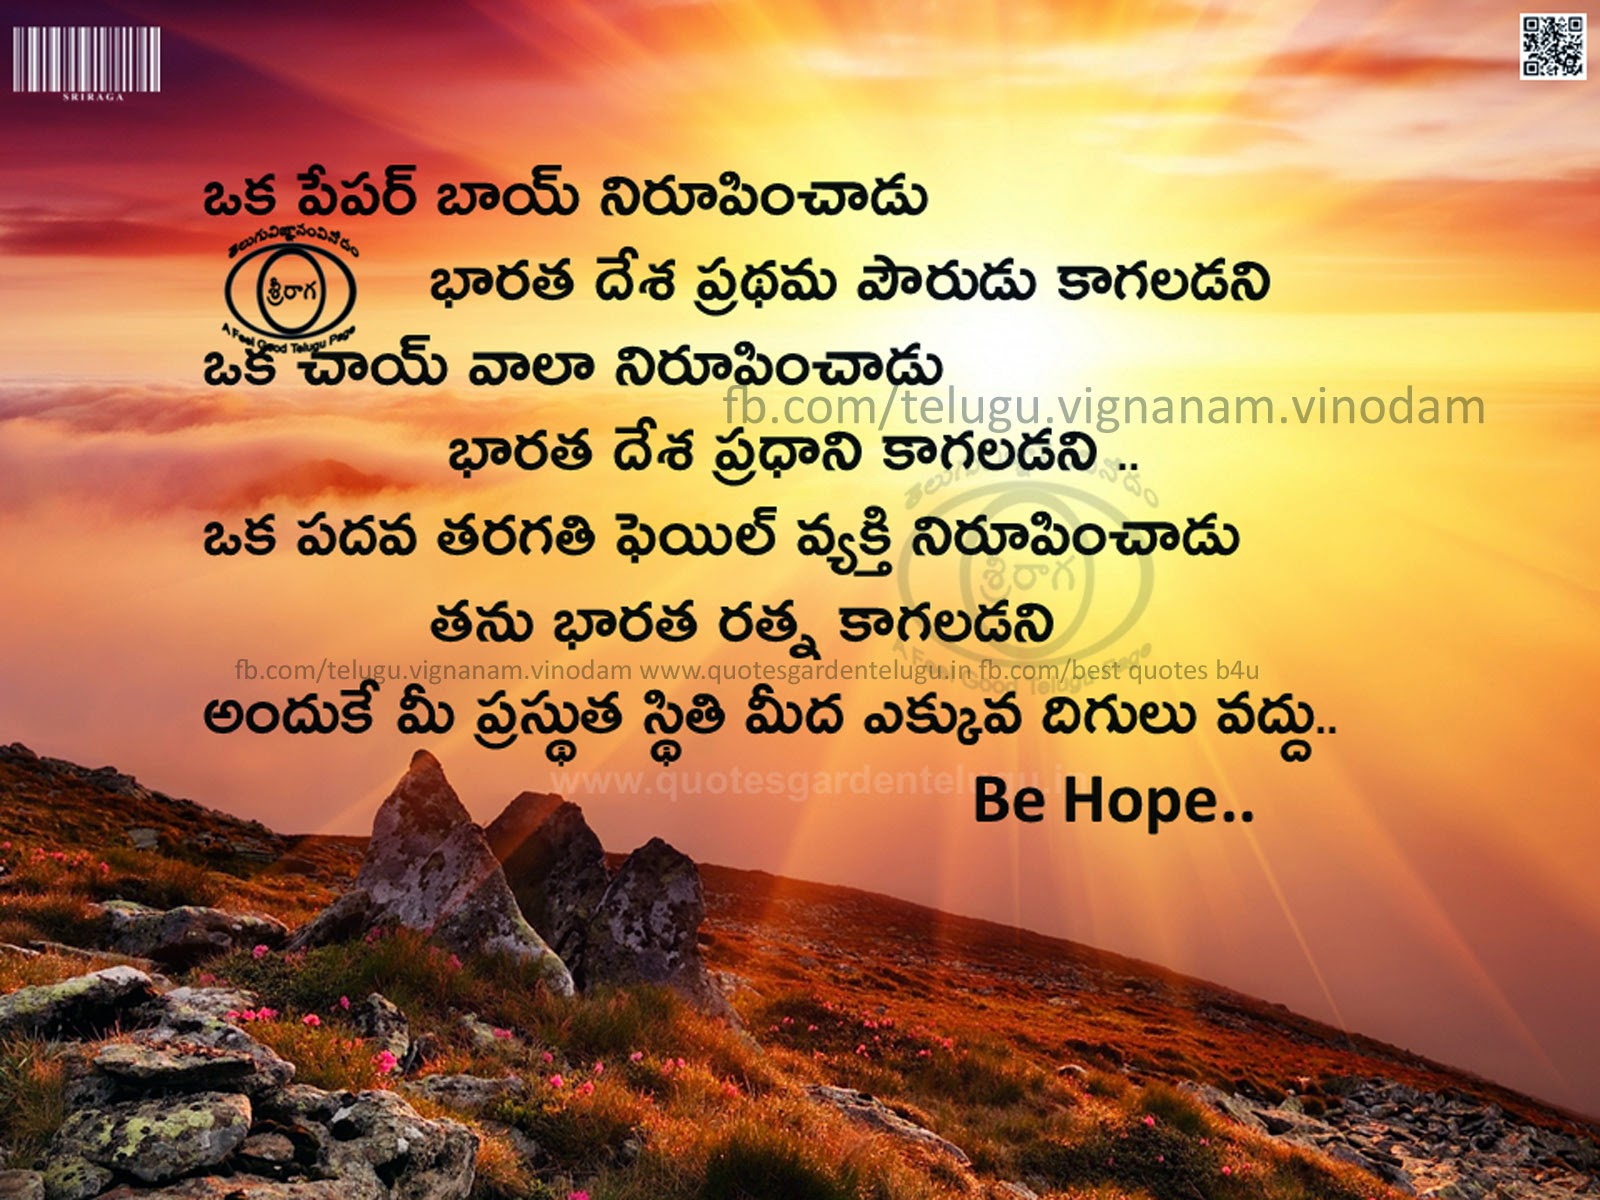 Best Telugu Quotations wall papers and images photoes